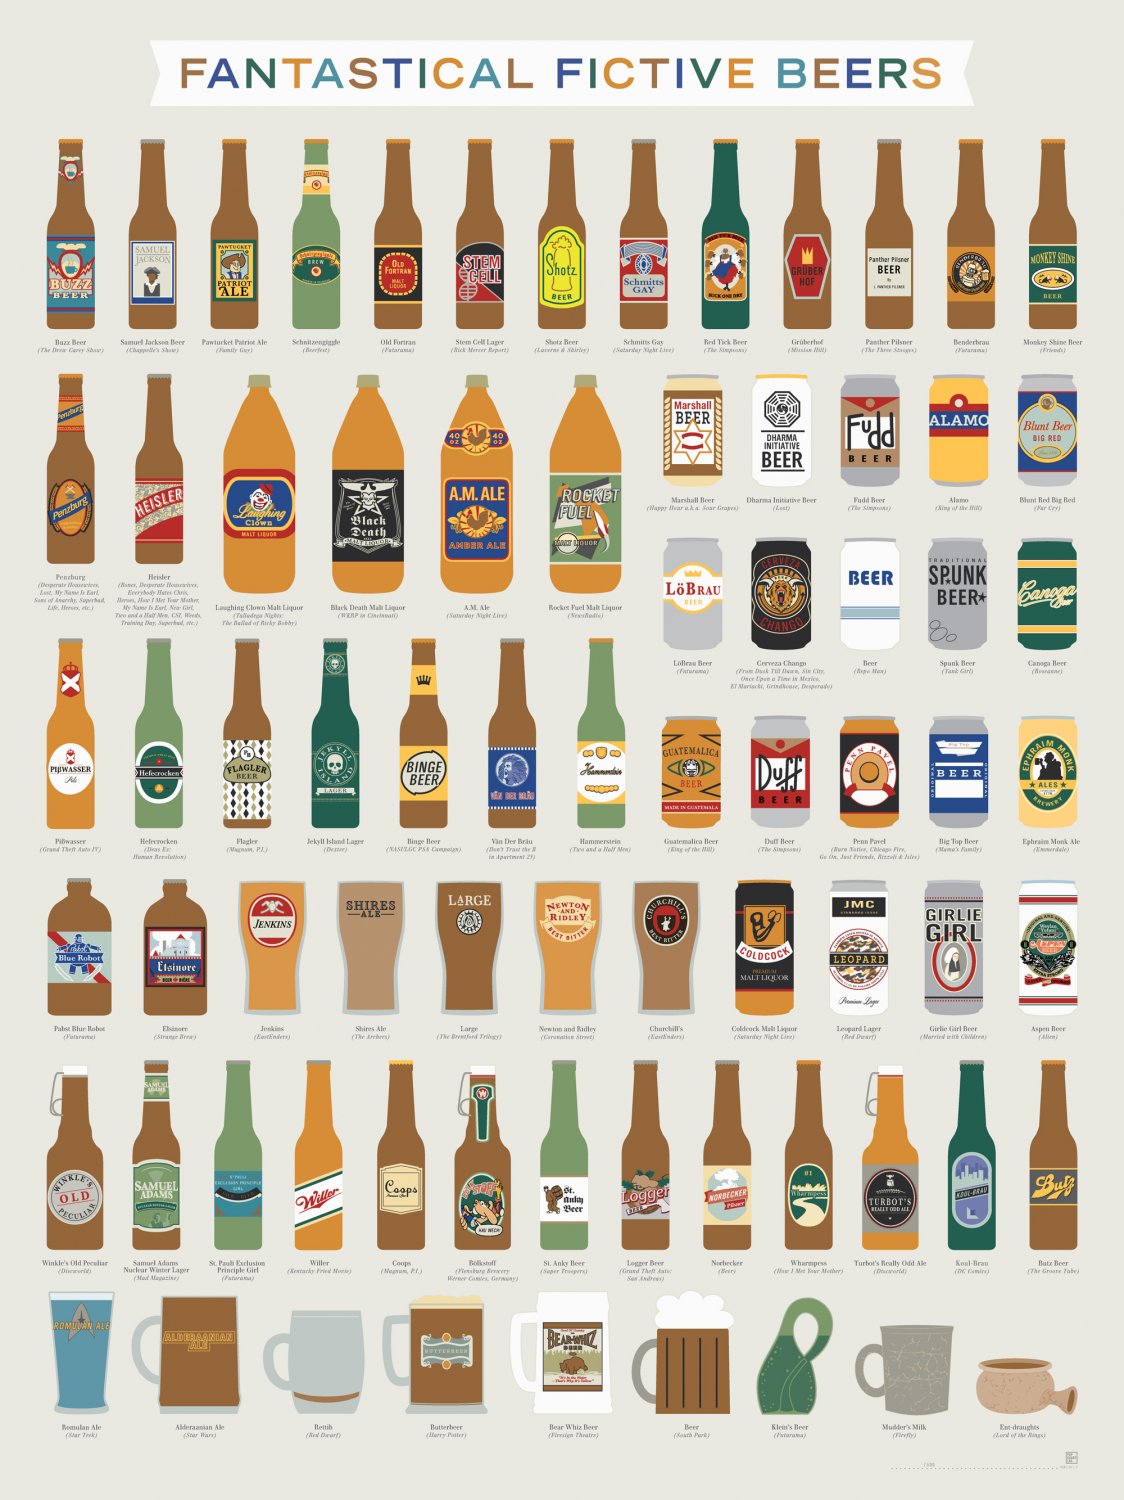 Fantastical Fictive Beers Chart 13"x19" (32cm/49cm) Polyester Fabric Poster